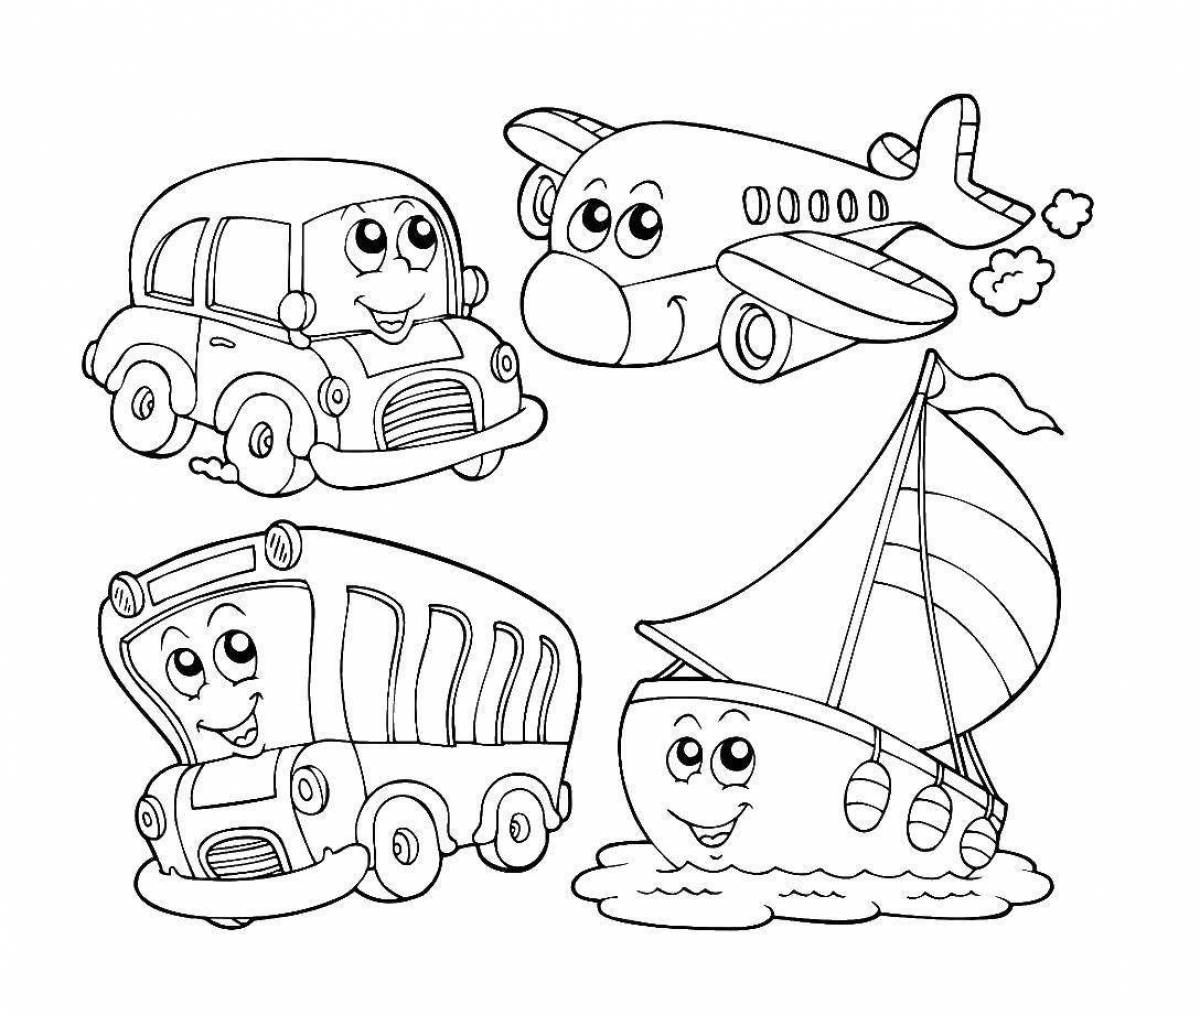 Adorable cars coloring book for kids 5-6 years old